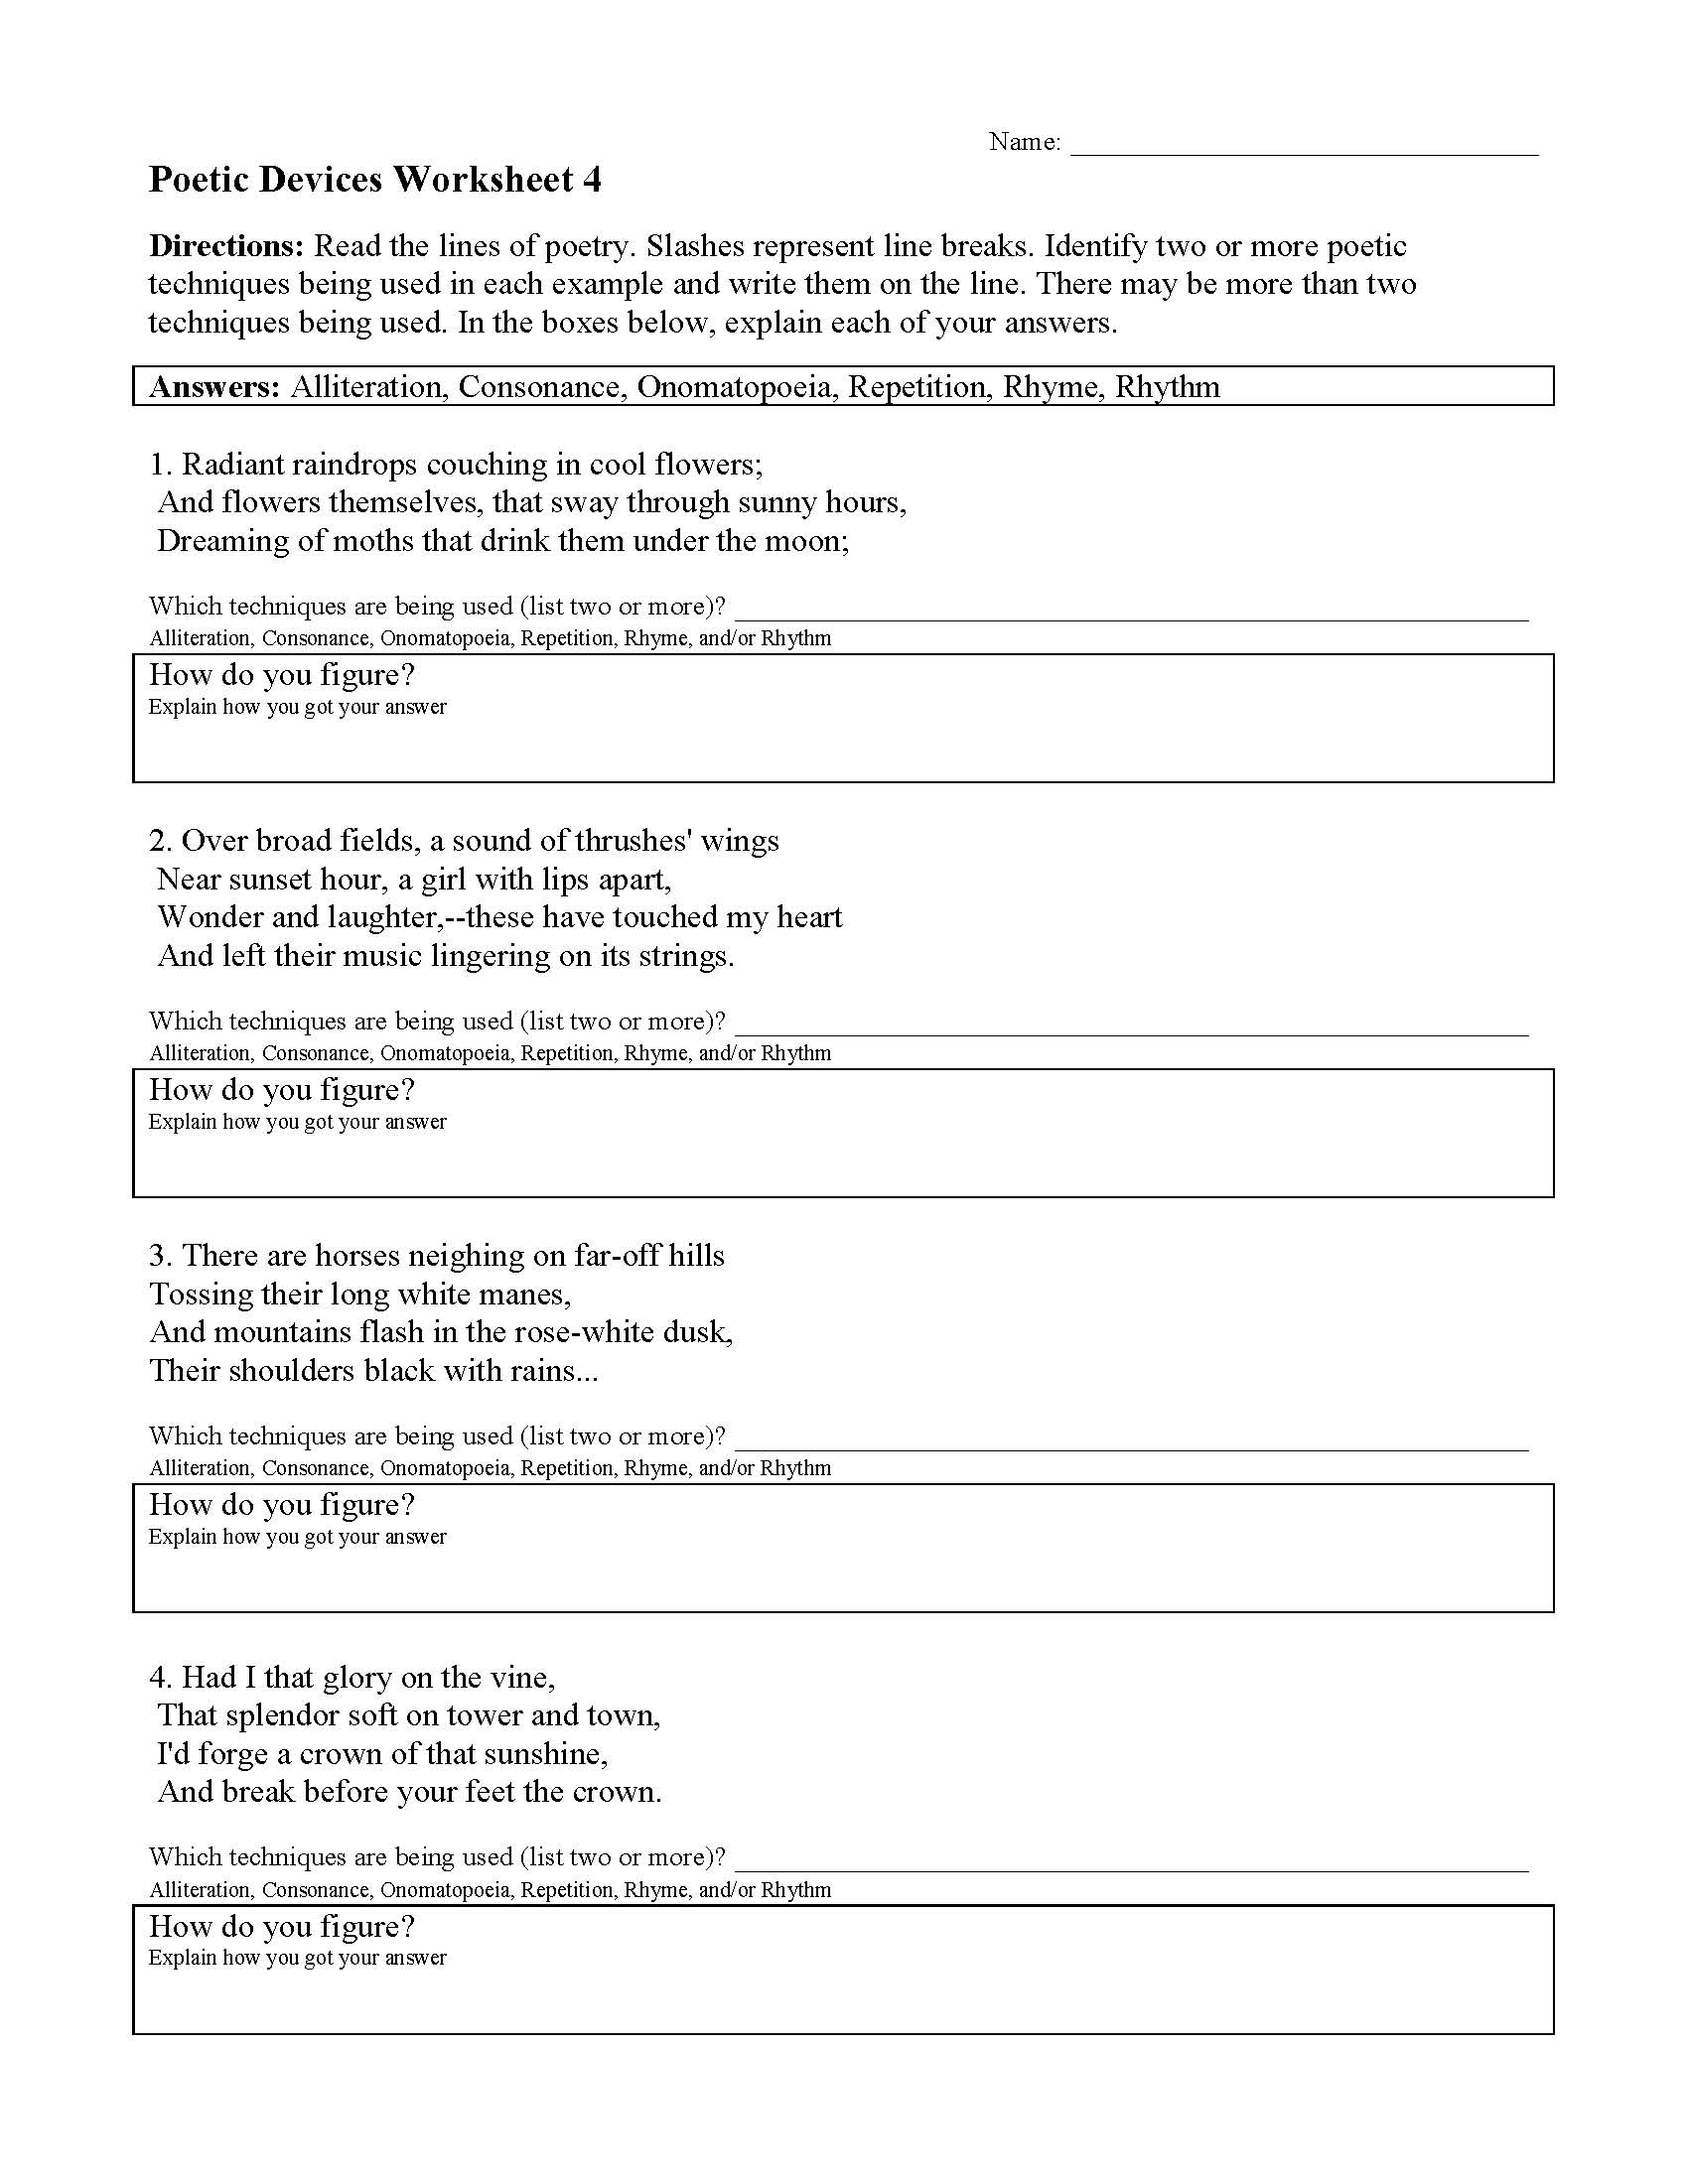 This is a preview image of Poetic Devices Worksheet 4. Click on it to enlarge it or view the source file.